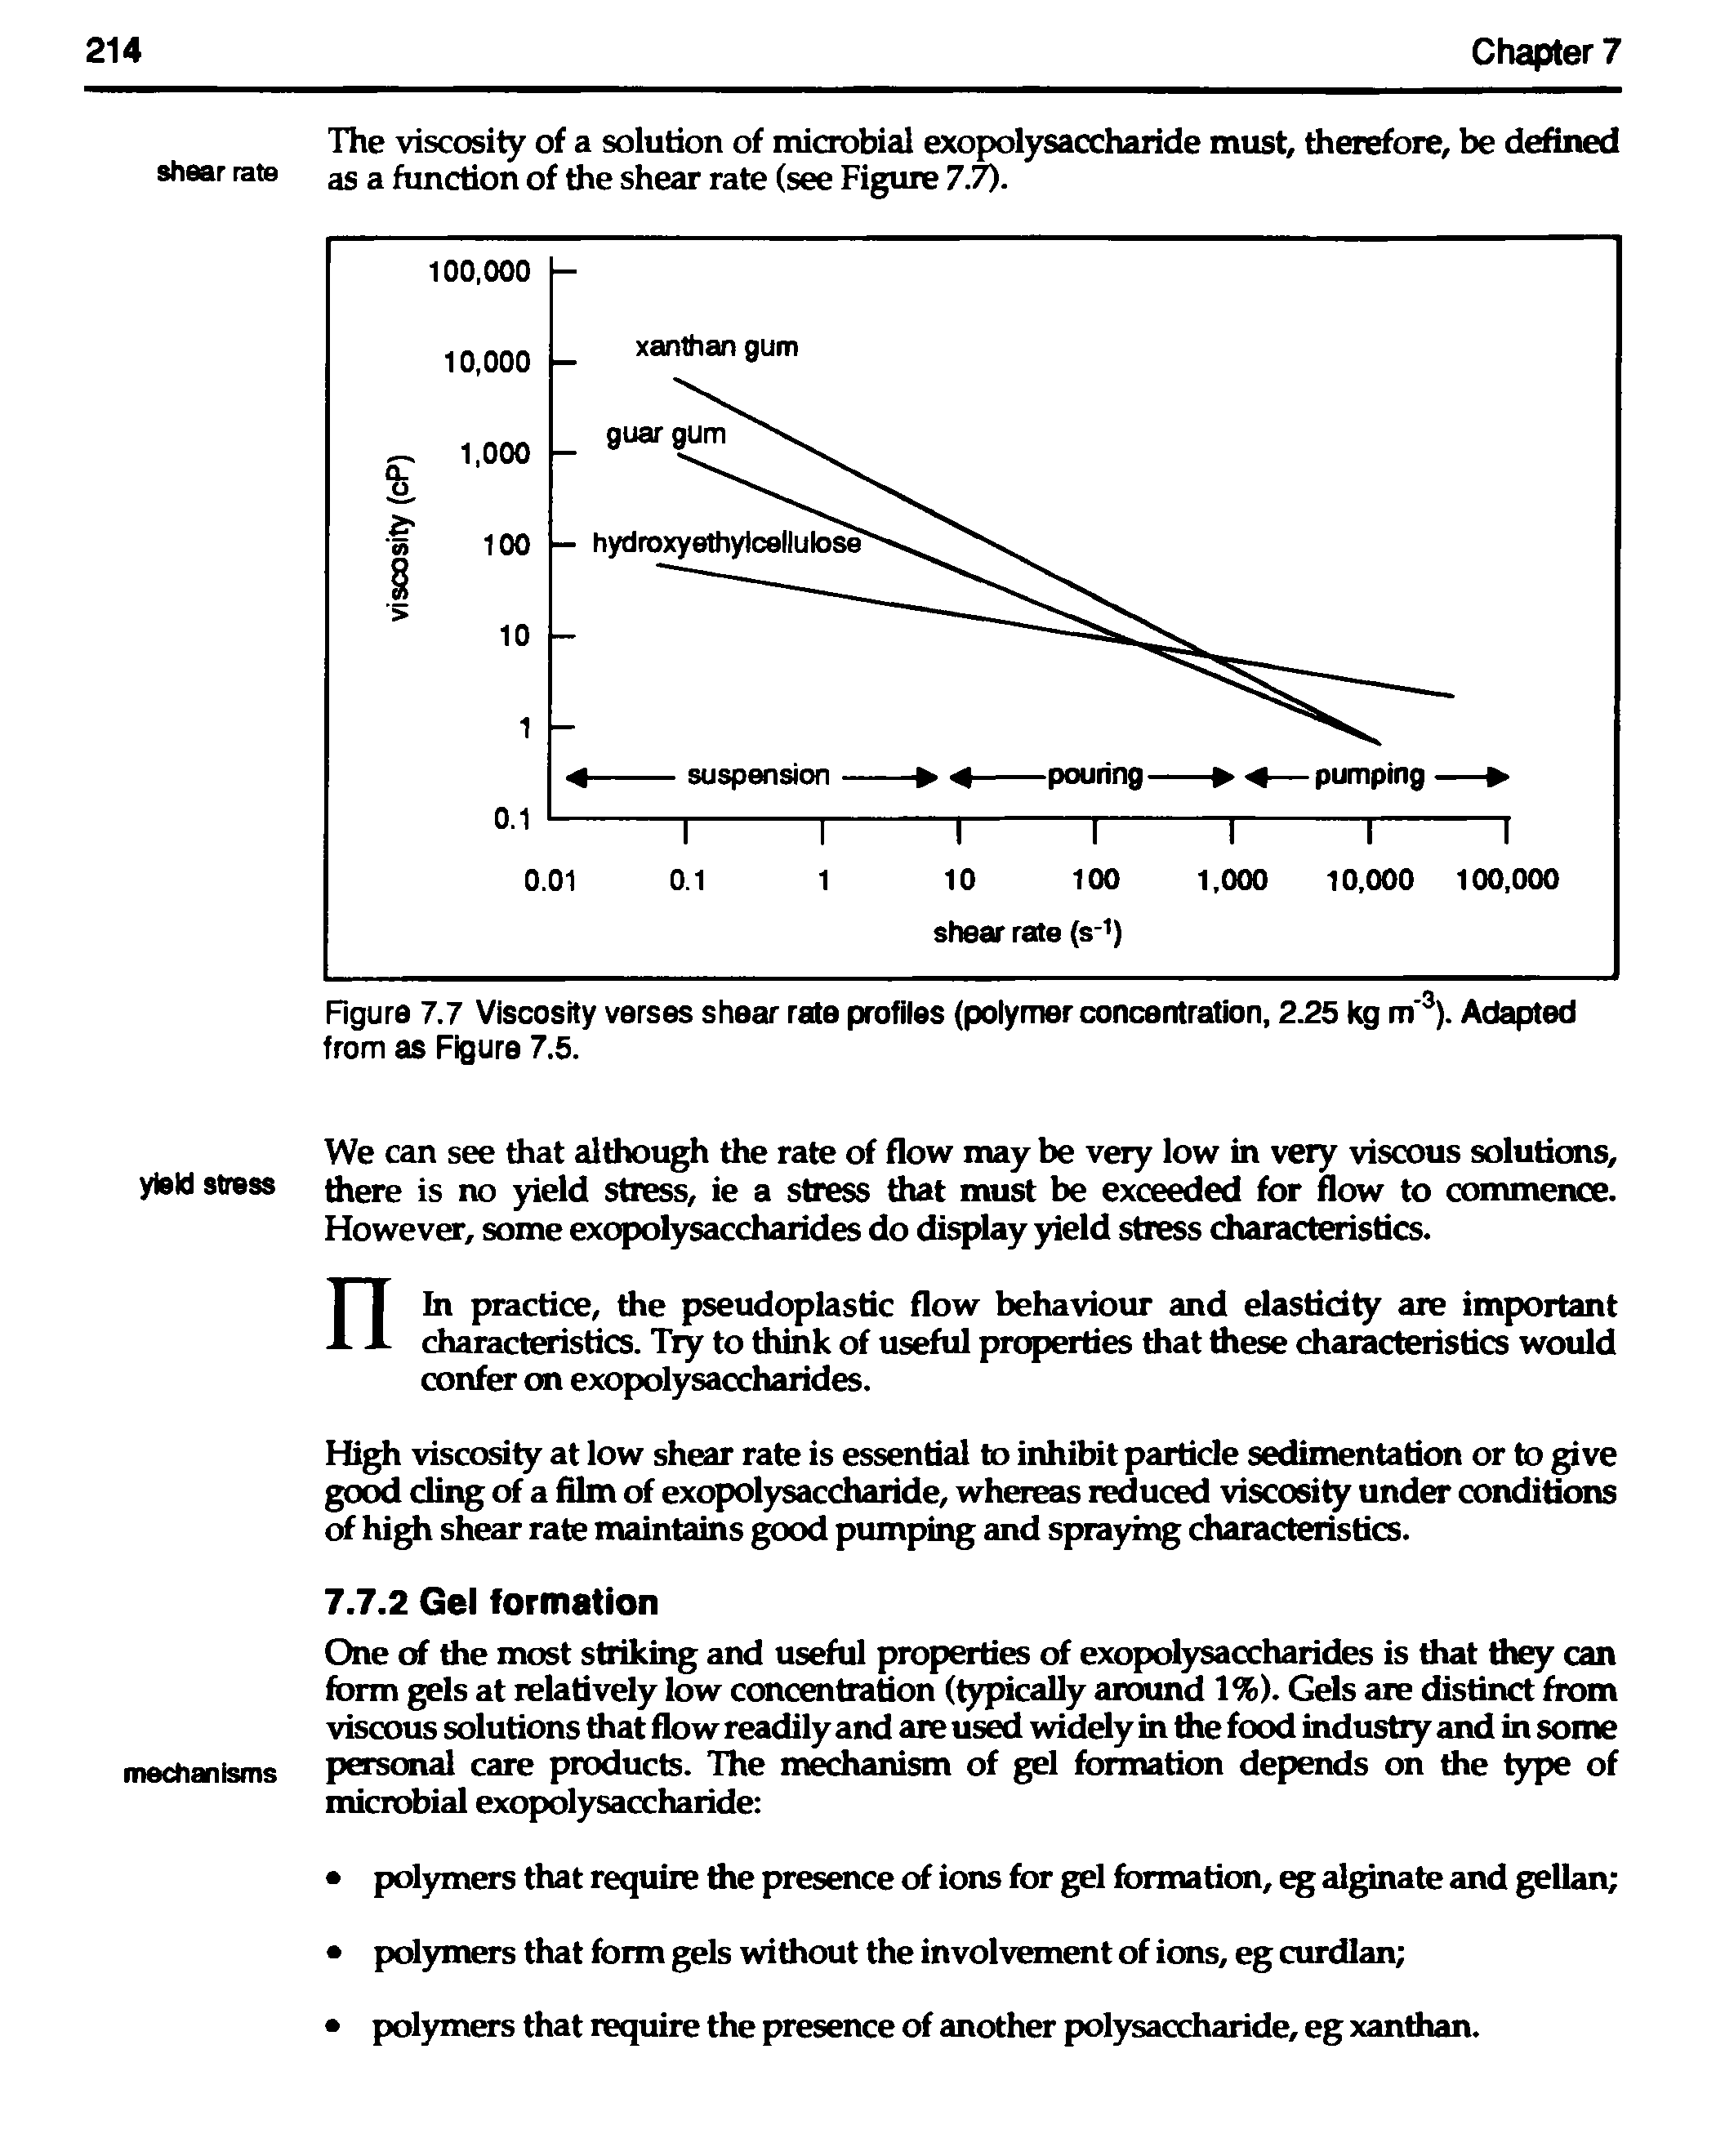 Figure 7.7 Viscosity verses shear rate profiles (polymer concentration, 2.25 kg m 3). Adapted from as Figure 7.5.